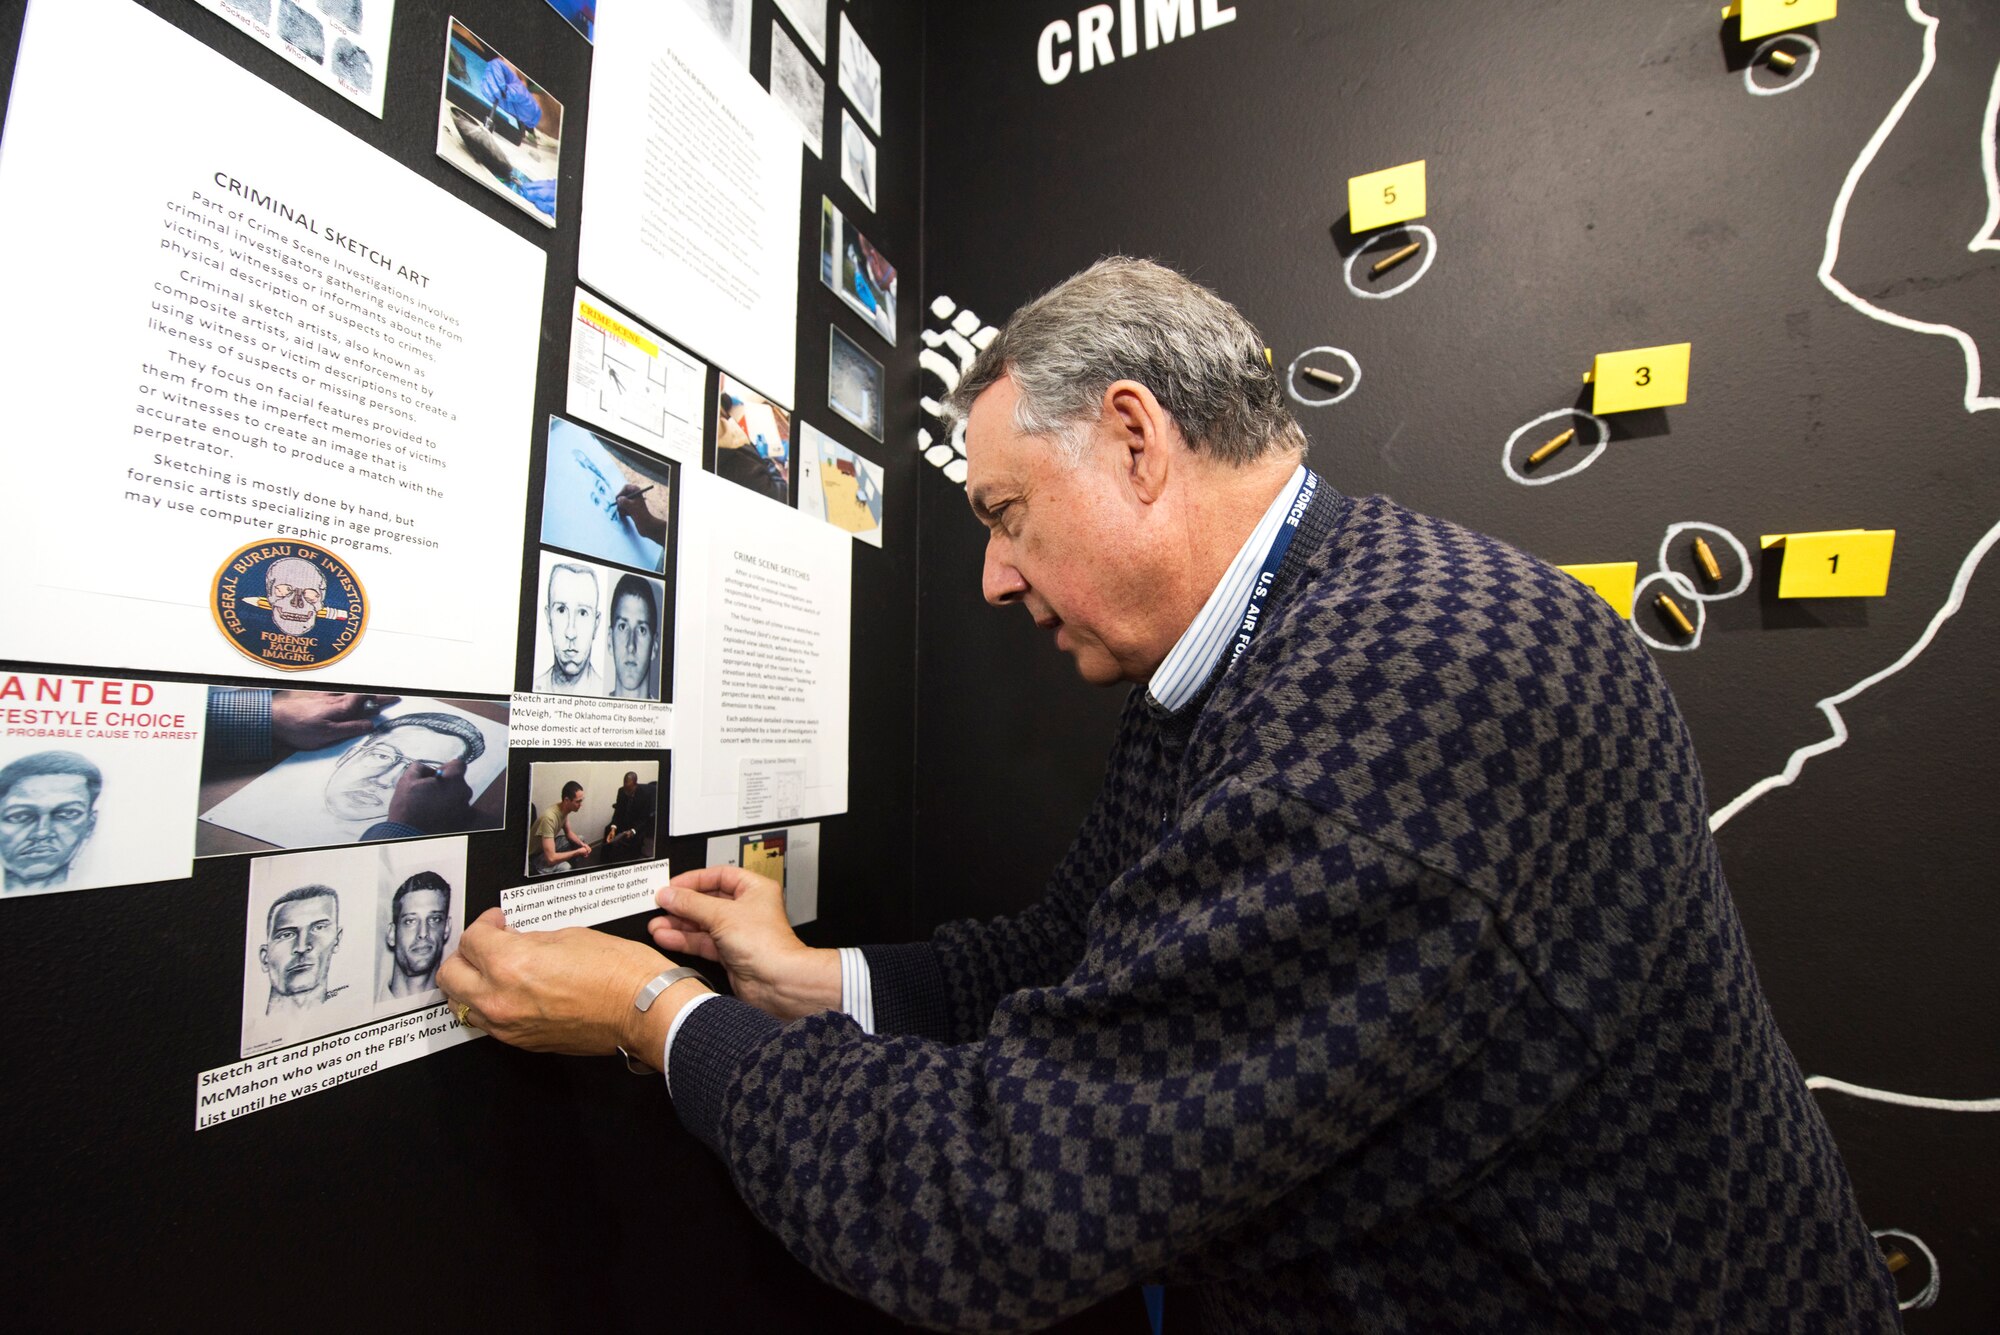 Rudy Purificato, Airman Heritage Museum director, works on a new crime scene exhibit in the Security Forces Museum at Joint Base San Antonio-Lackland, Texas.